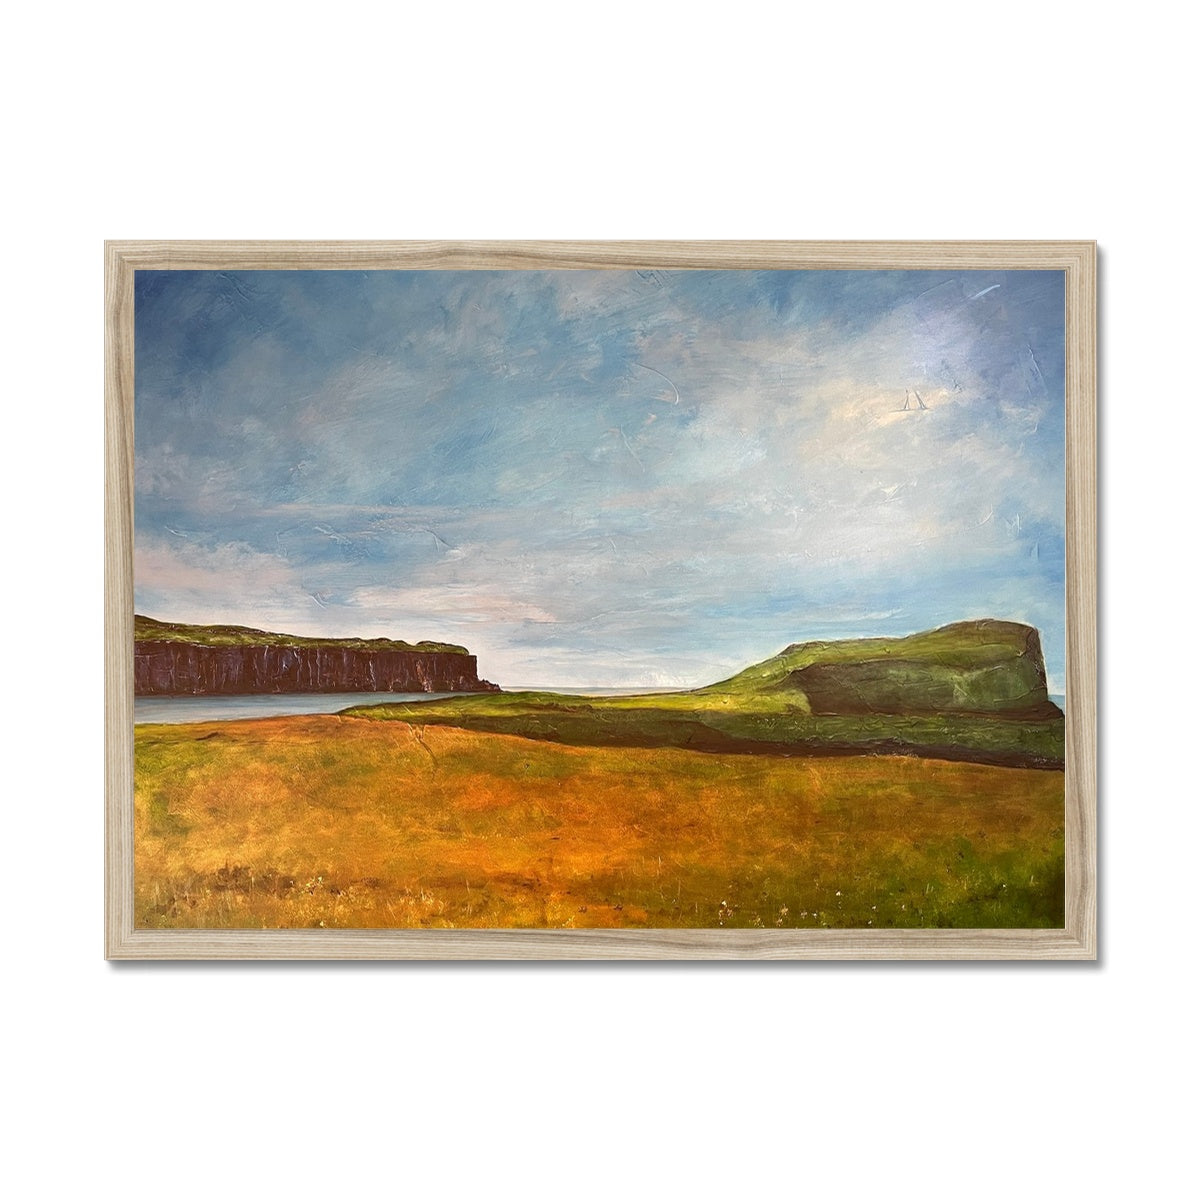 Approaching Oronsay Skye Painting | Framed Prints From Scotland-Framed Prints-Skye Art Gallery-A2 Landscape-Natural Frame-Paintings, Prints, Homeware, Art Gifts From Scotland By Scottish Artist Kevin Hunter